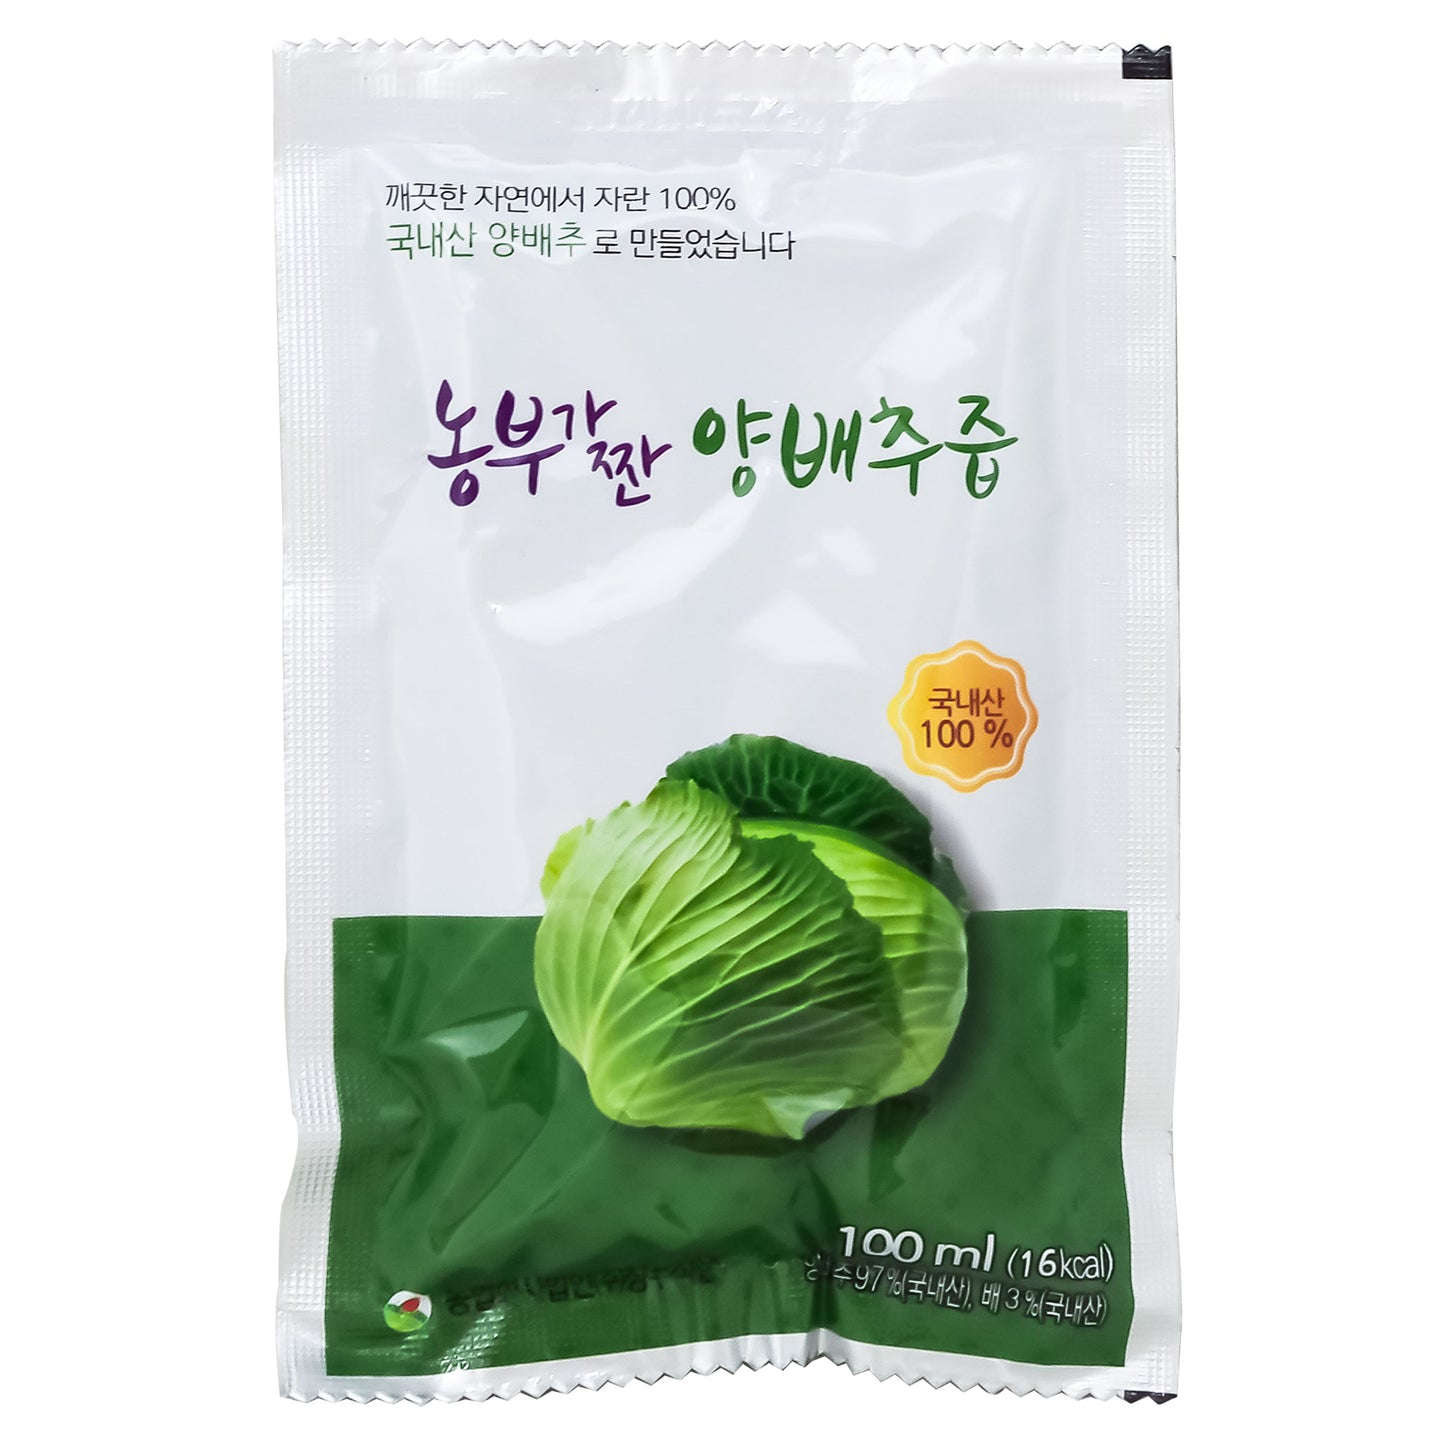 Farmers Cabbage and Pear Juice, 3.4 oz per Pack, 30 Packs 1 order 양배추 배즙